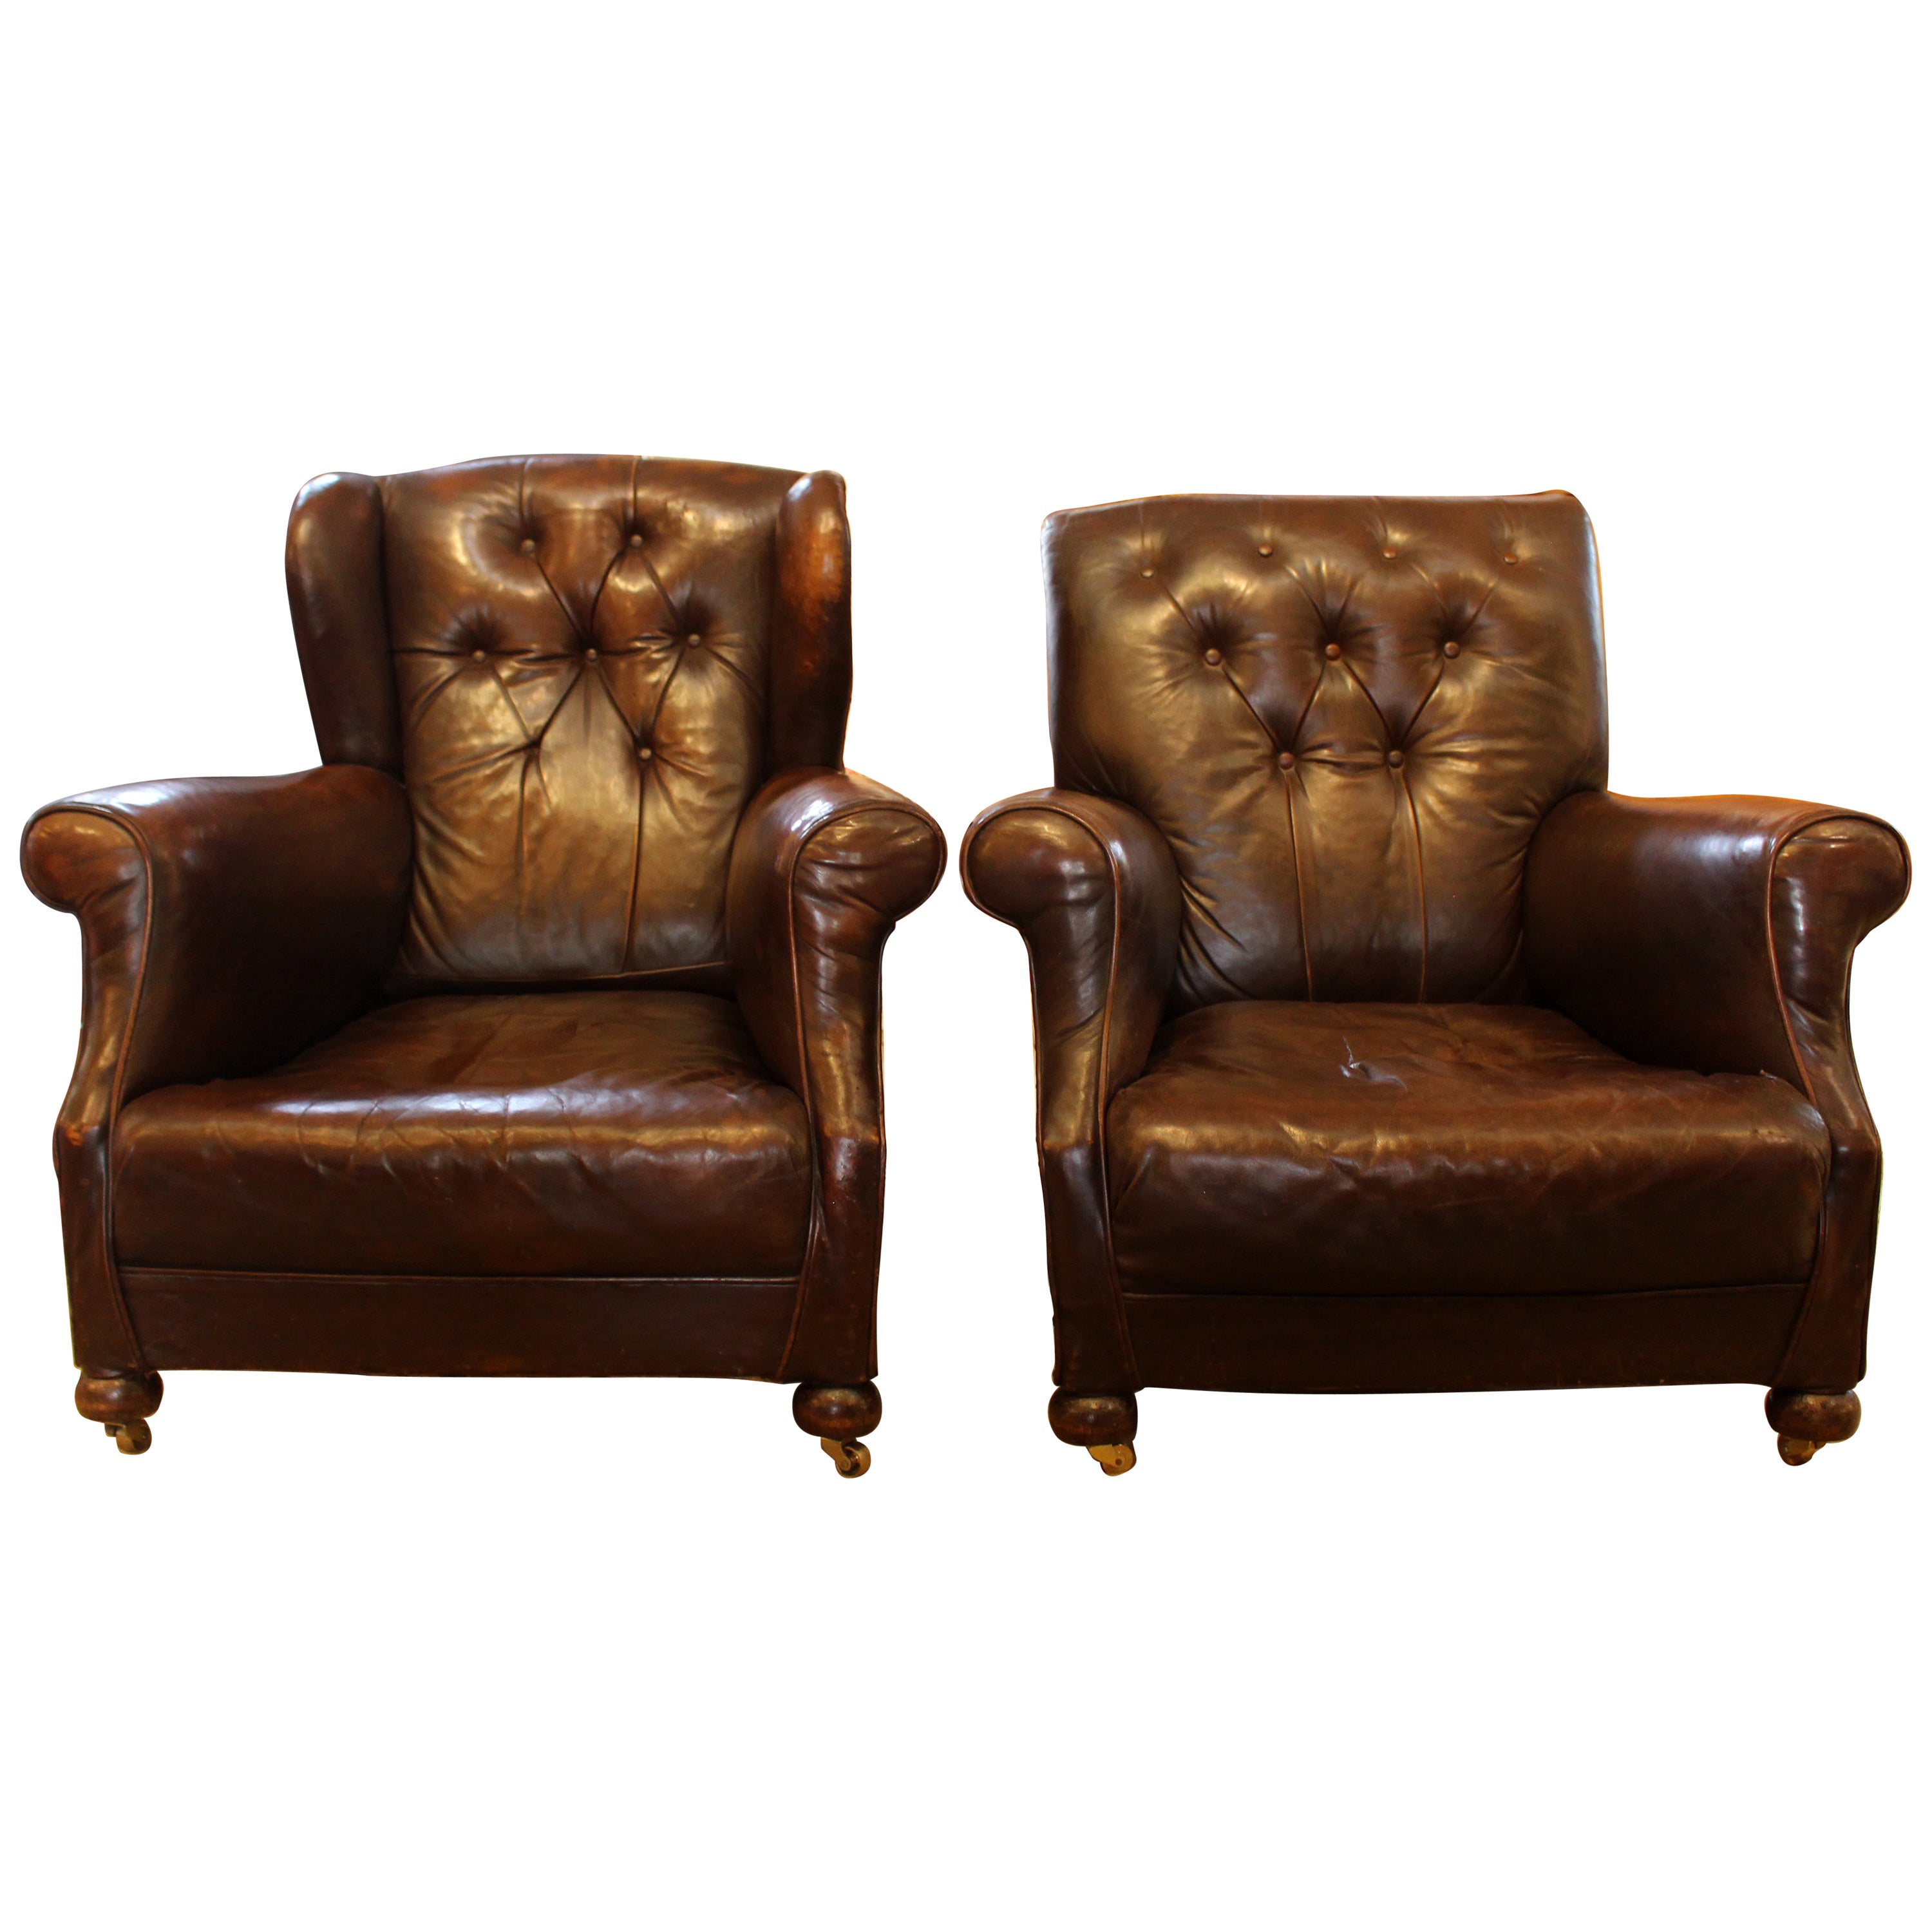 Late 19th Century English Pair of Leather Club Chairs For Sale